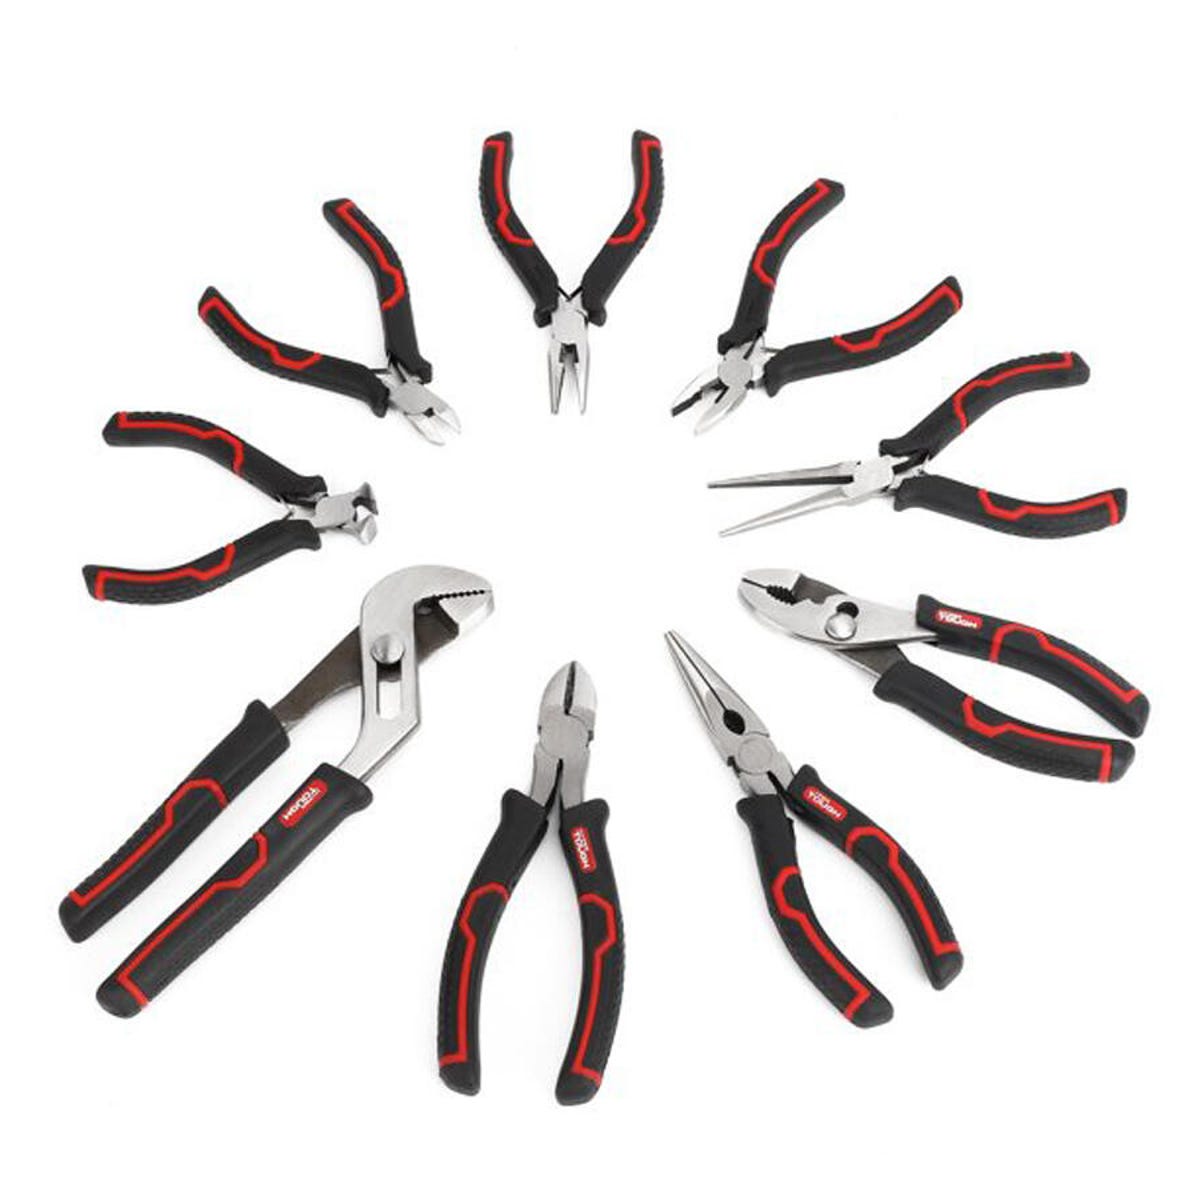 Do It All With This 9-Piece Ergonomic Pliers Set for $8 - CNET